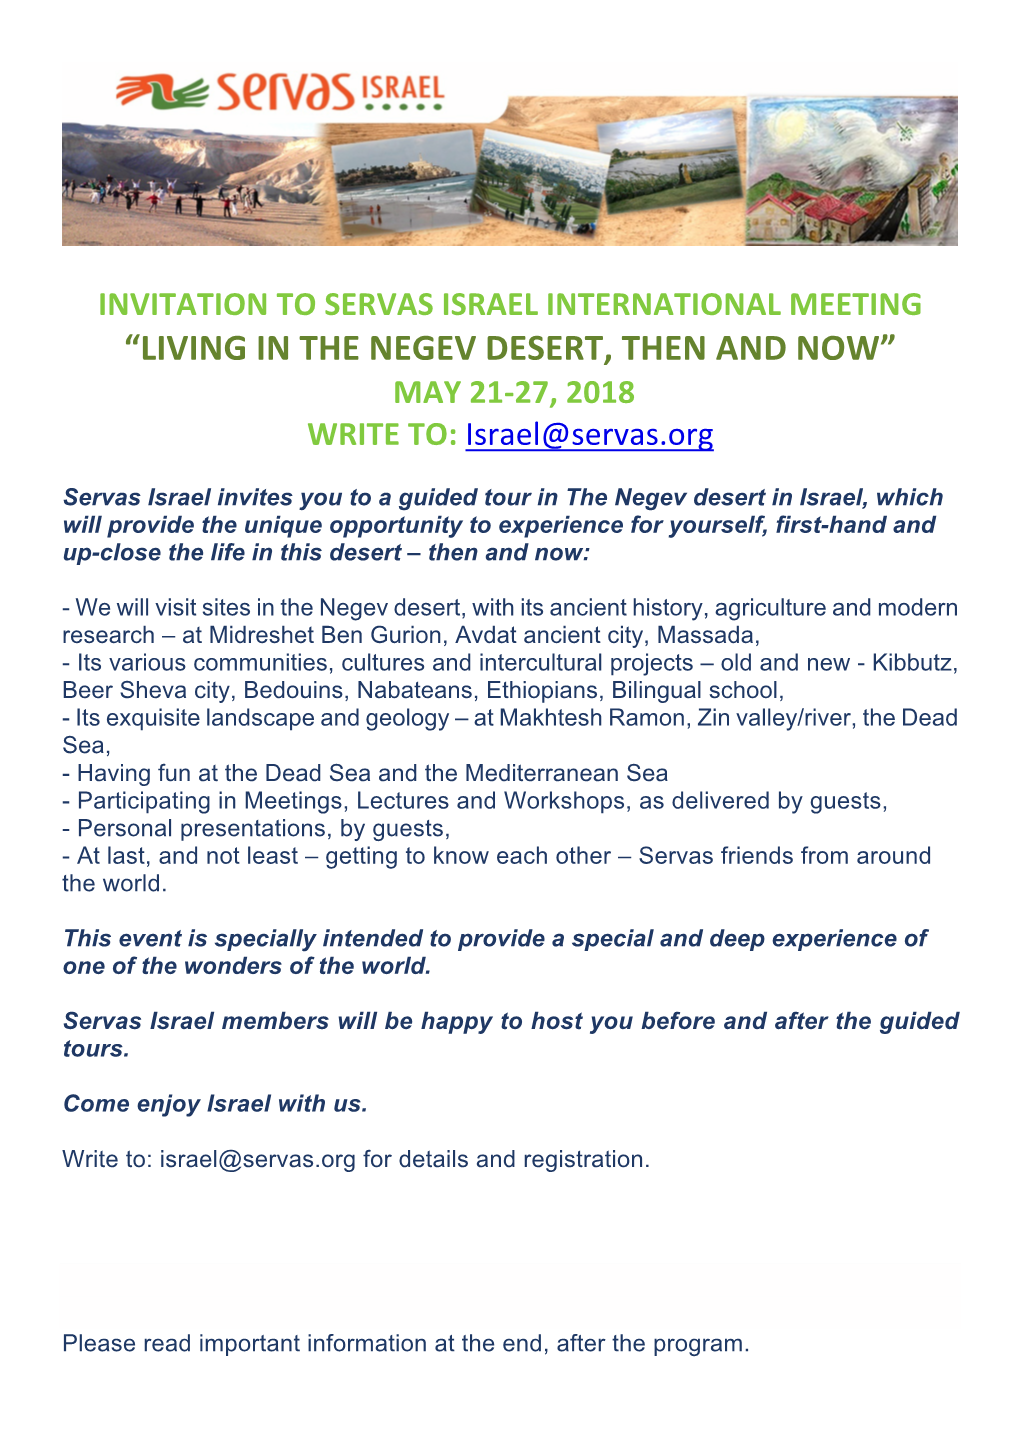 INVITATION to SERVAS ISRAEL INTERNATIONAL MEETING “LIVING in the NEGEV DESERT, THEN and NOW” MAY 21-27, 2018 WRITE TO: Israel@Servas.Org